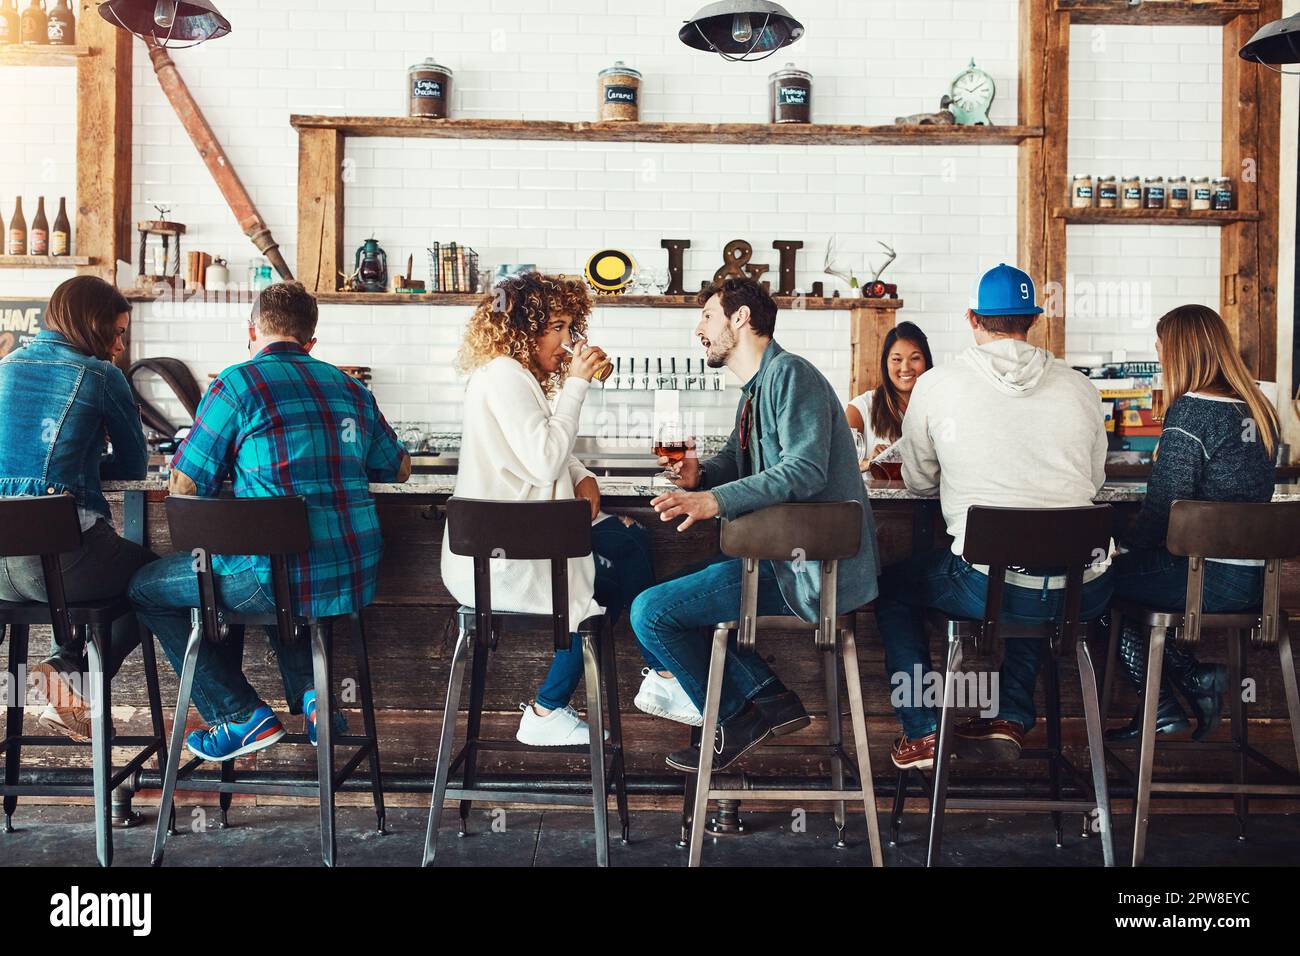 Discussing different types of beer. young people enjoying a drink at a bar. Stock Photo